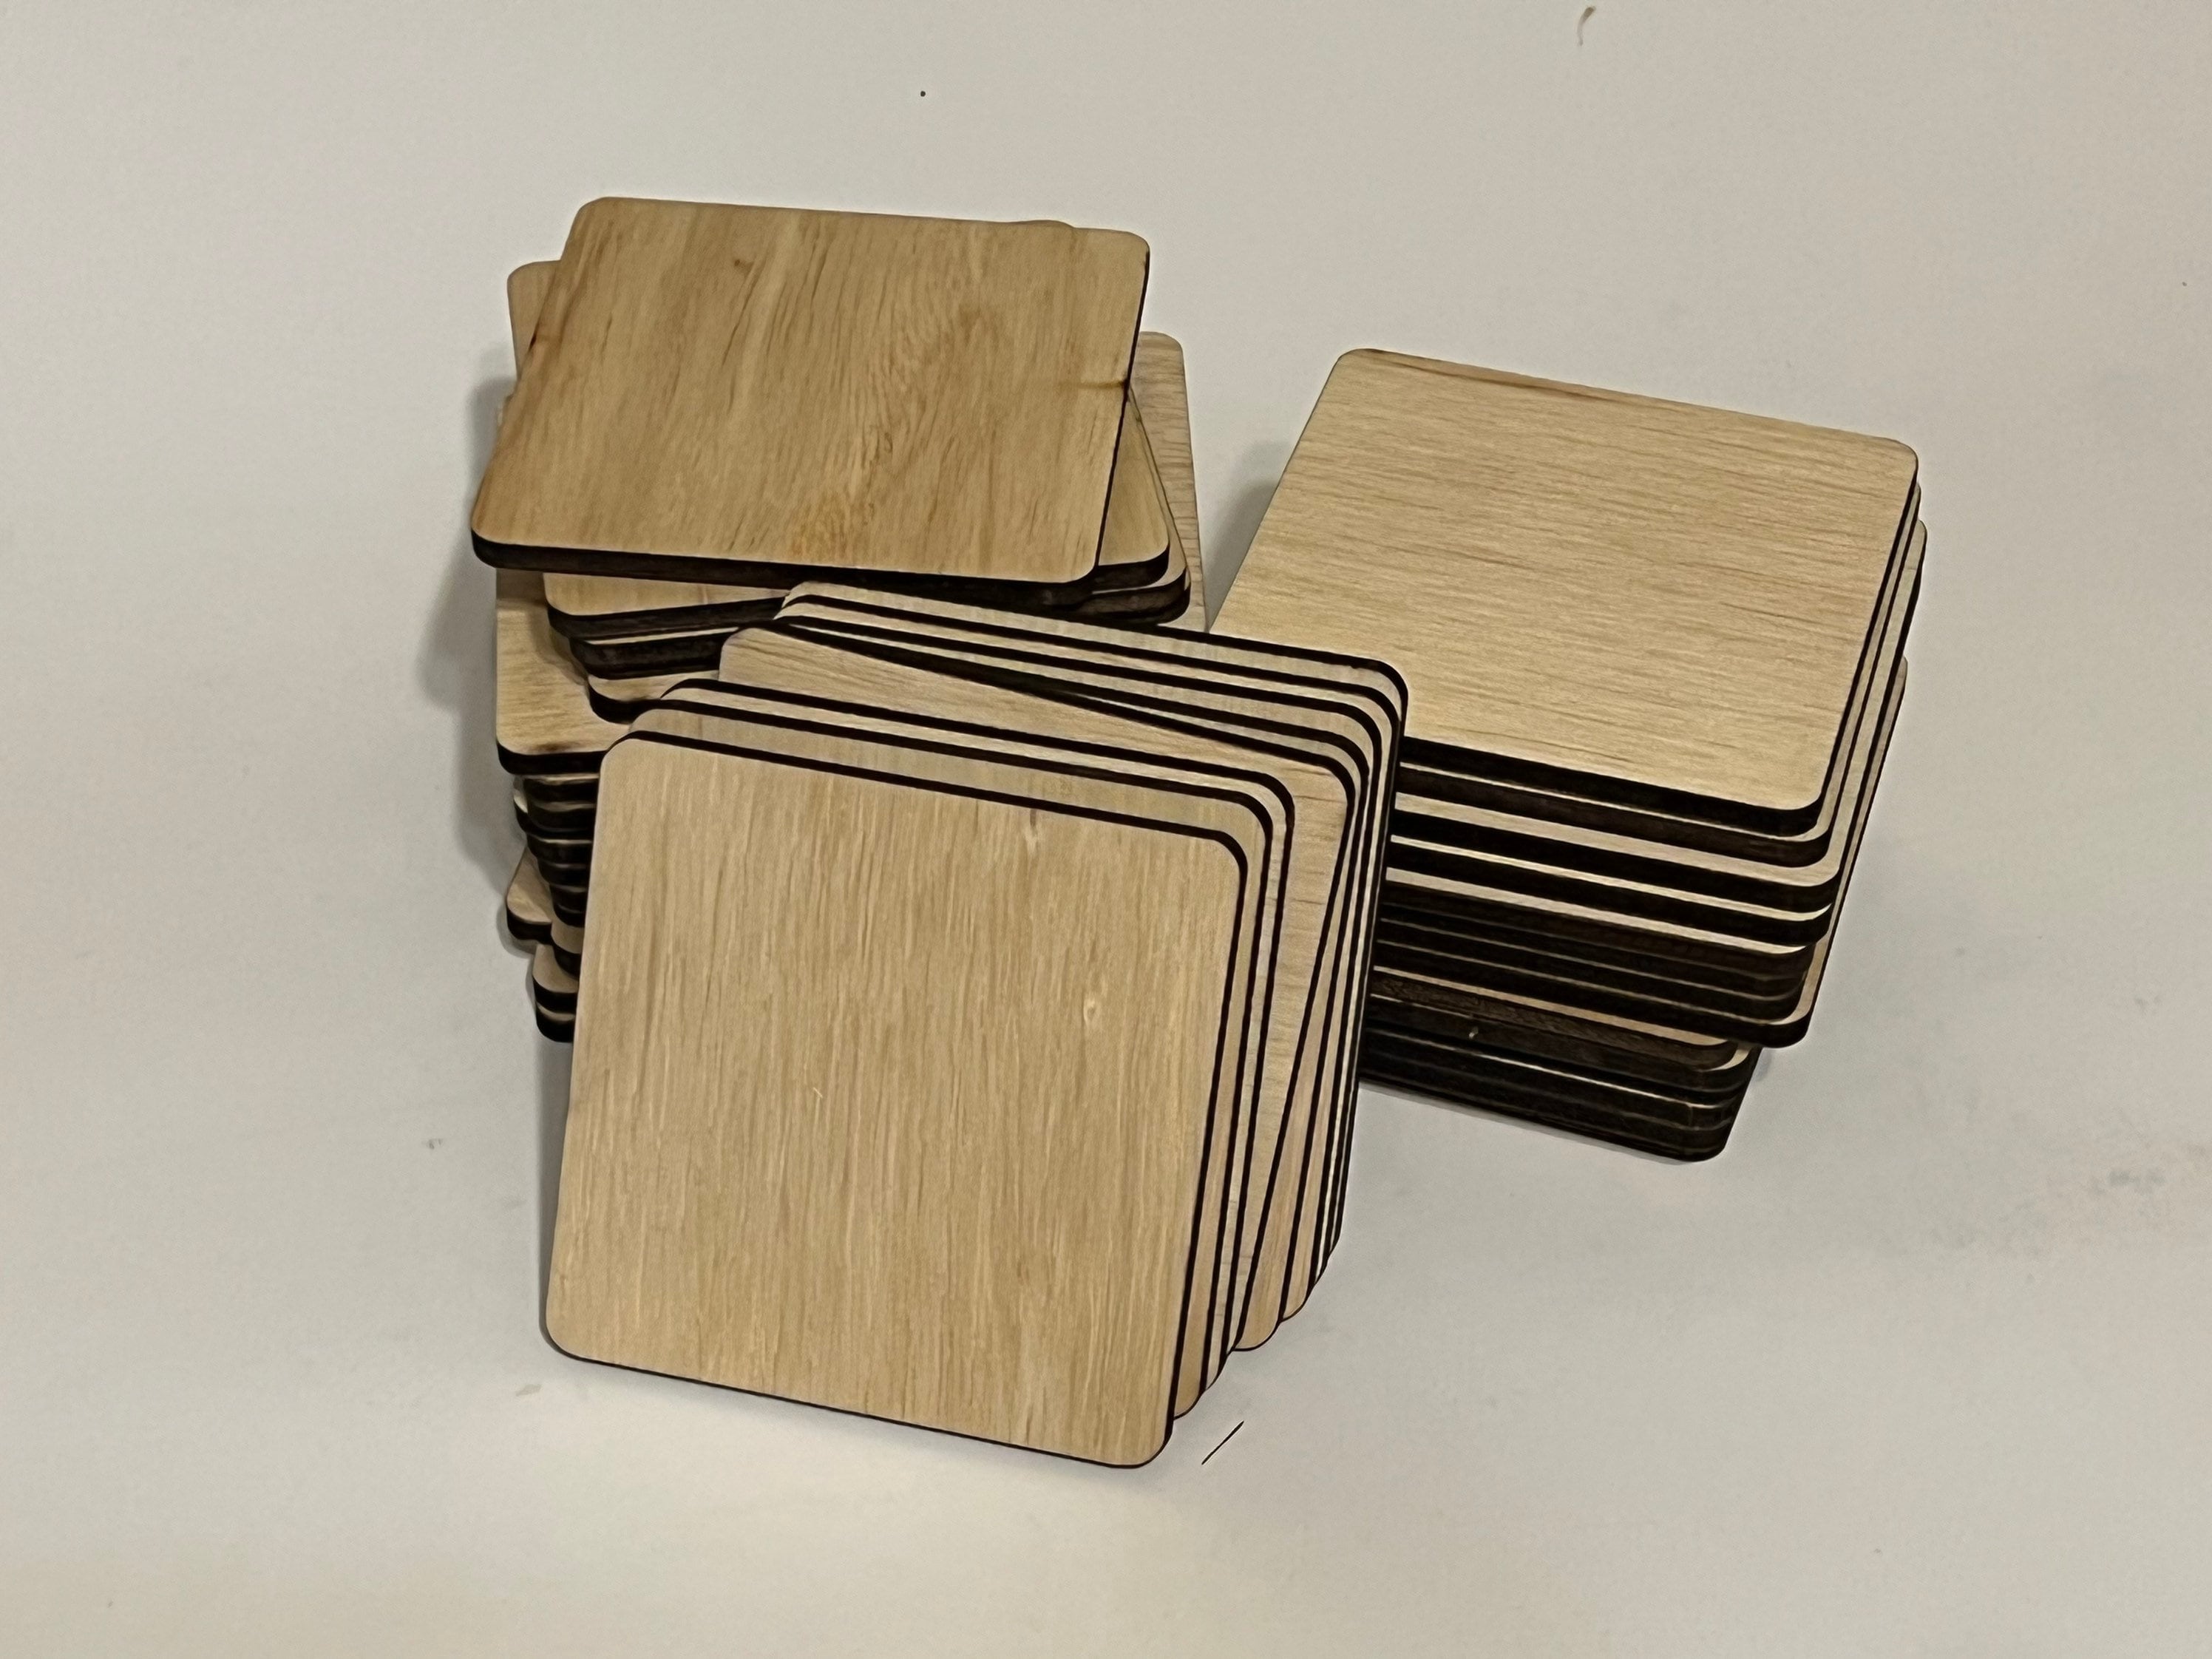 12Pack Unfinished Wood Coasters, 4 inch Round Blank Wooden Craft Coasters Wood Slices for DIY Architectural Models Drawing Painting Wood Engraving